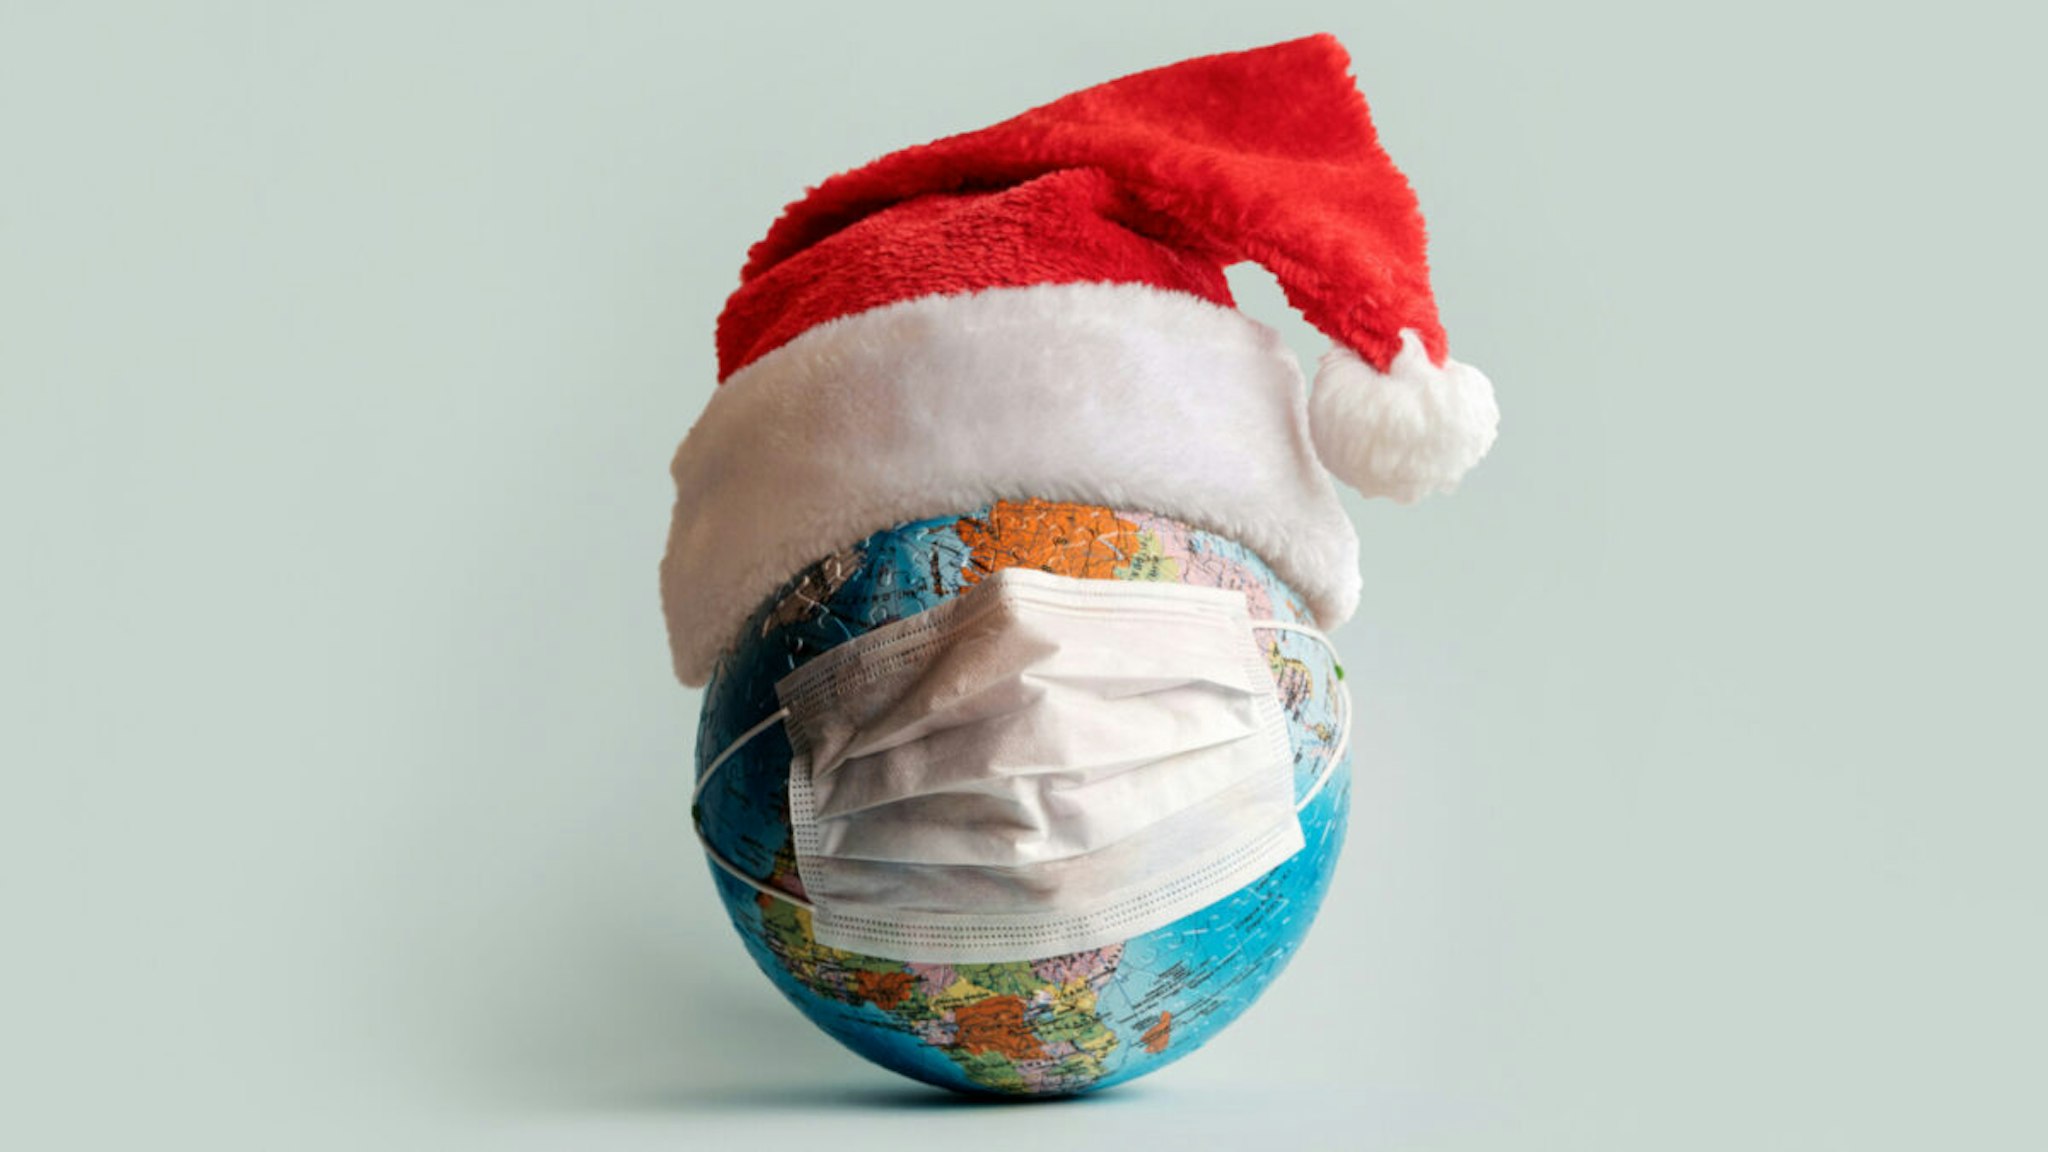 Globe made of jigsaw puzzles with a protective medical mask as a prophylaxis in the fight against coronavirus infection. Measures against the spread of the virus.